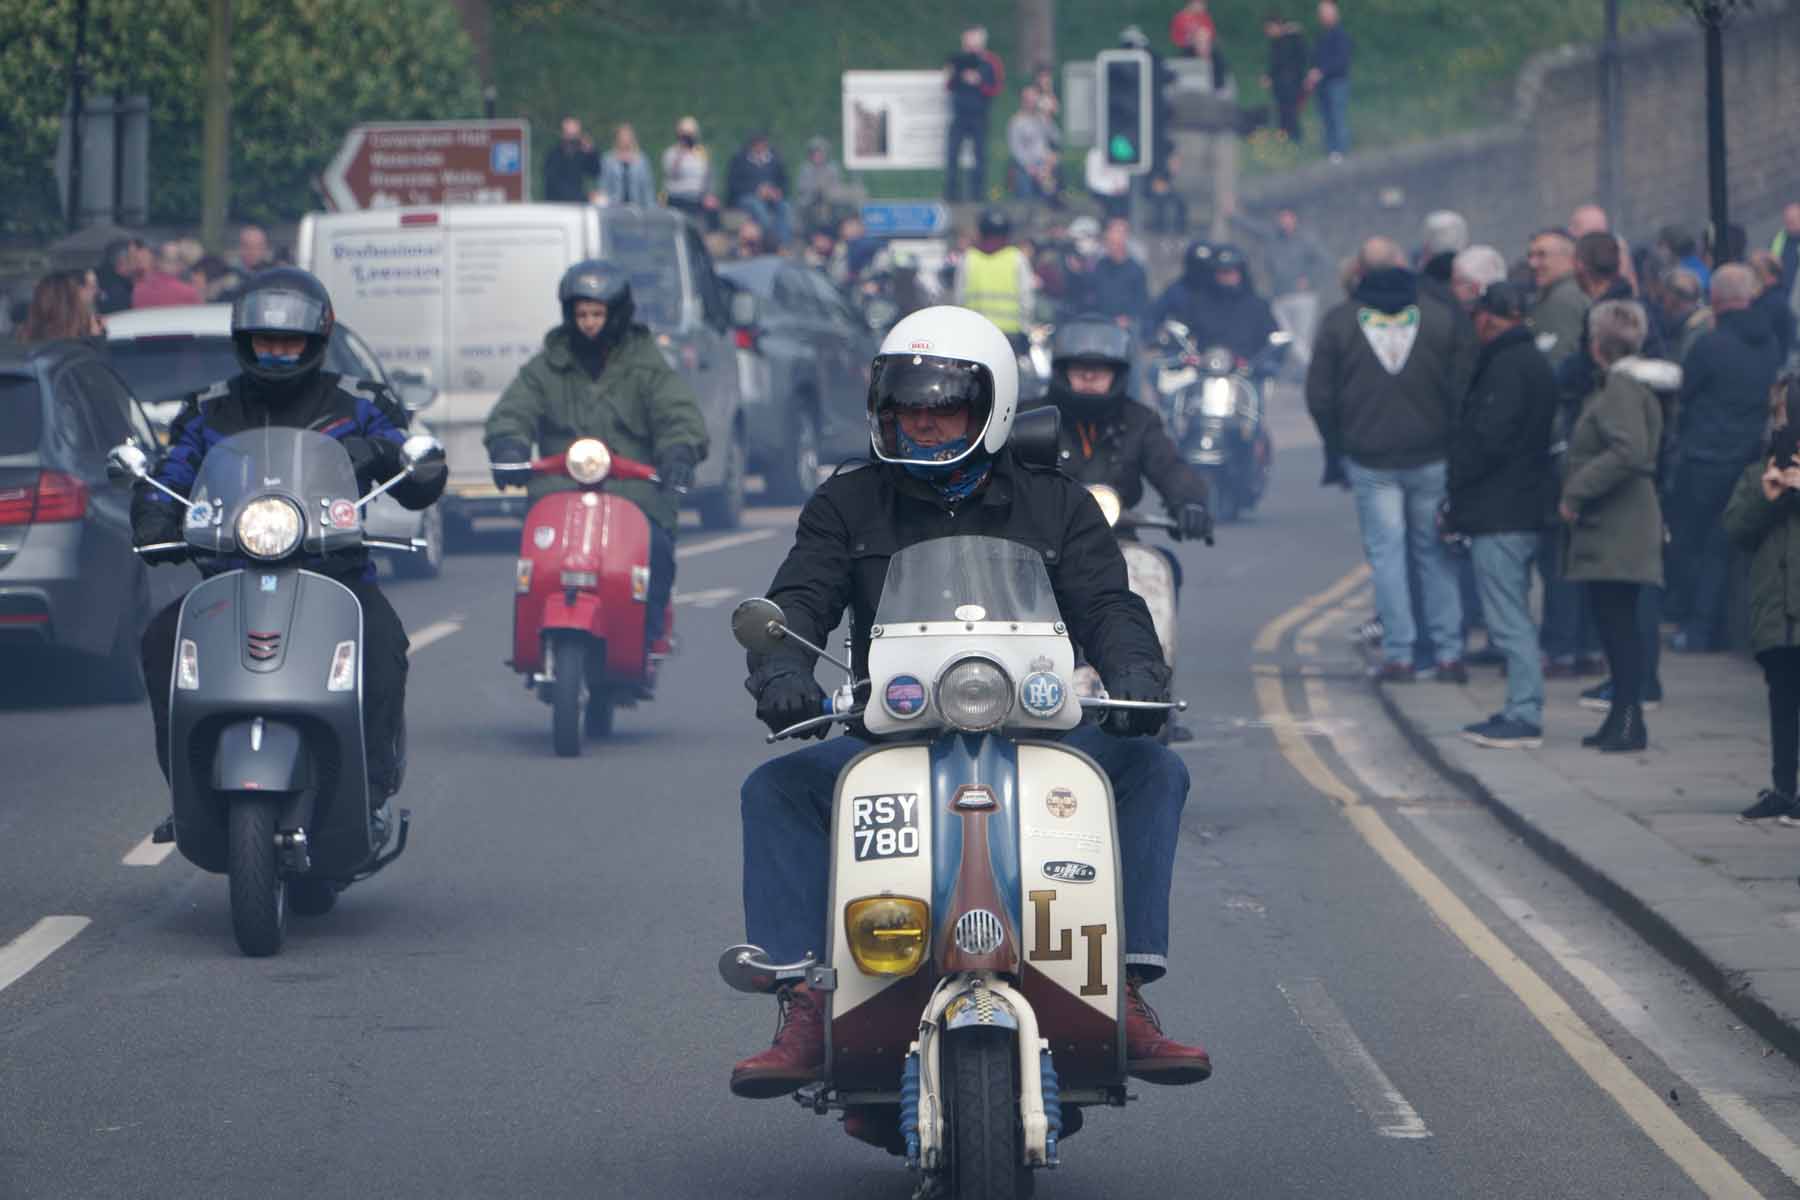 Yorkshire Scooter Alliance - Knaresborough to Wetherby run out